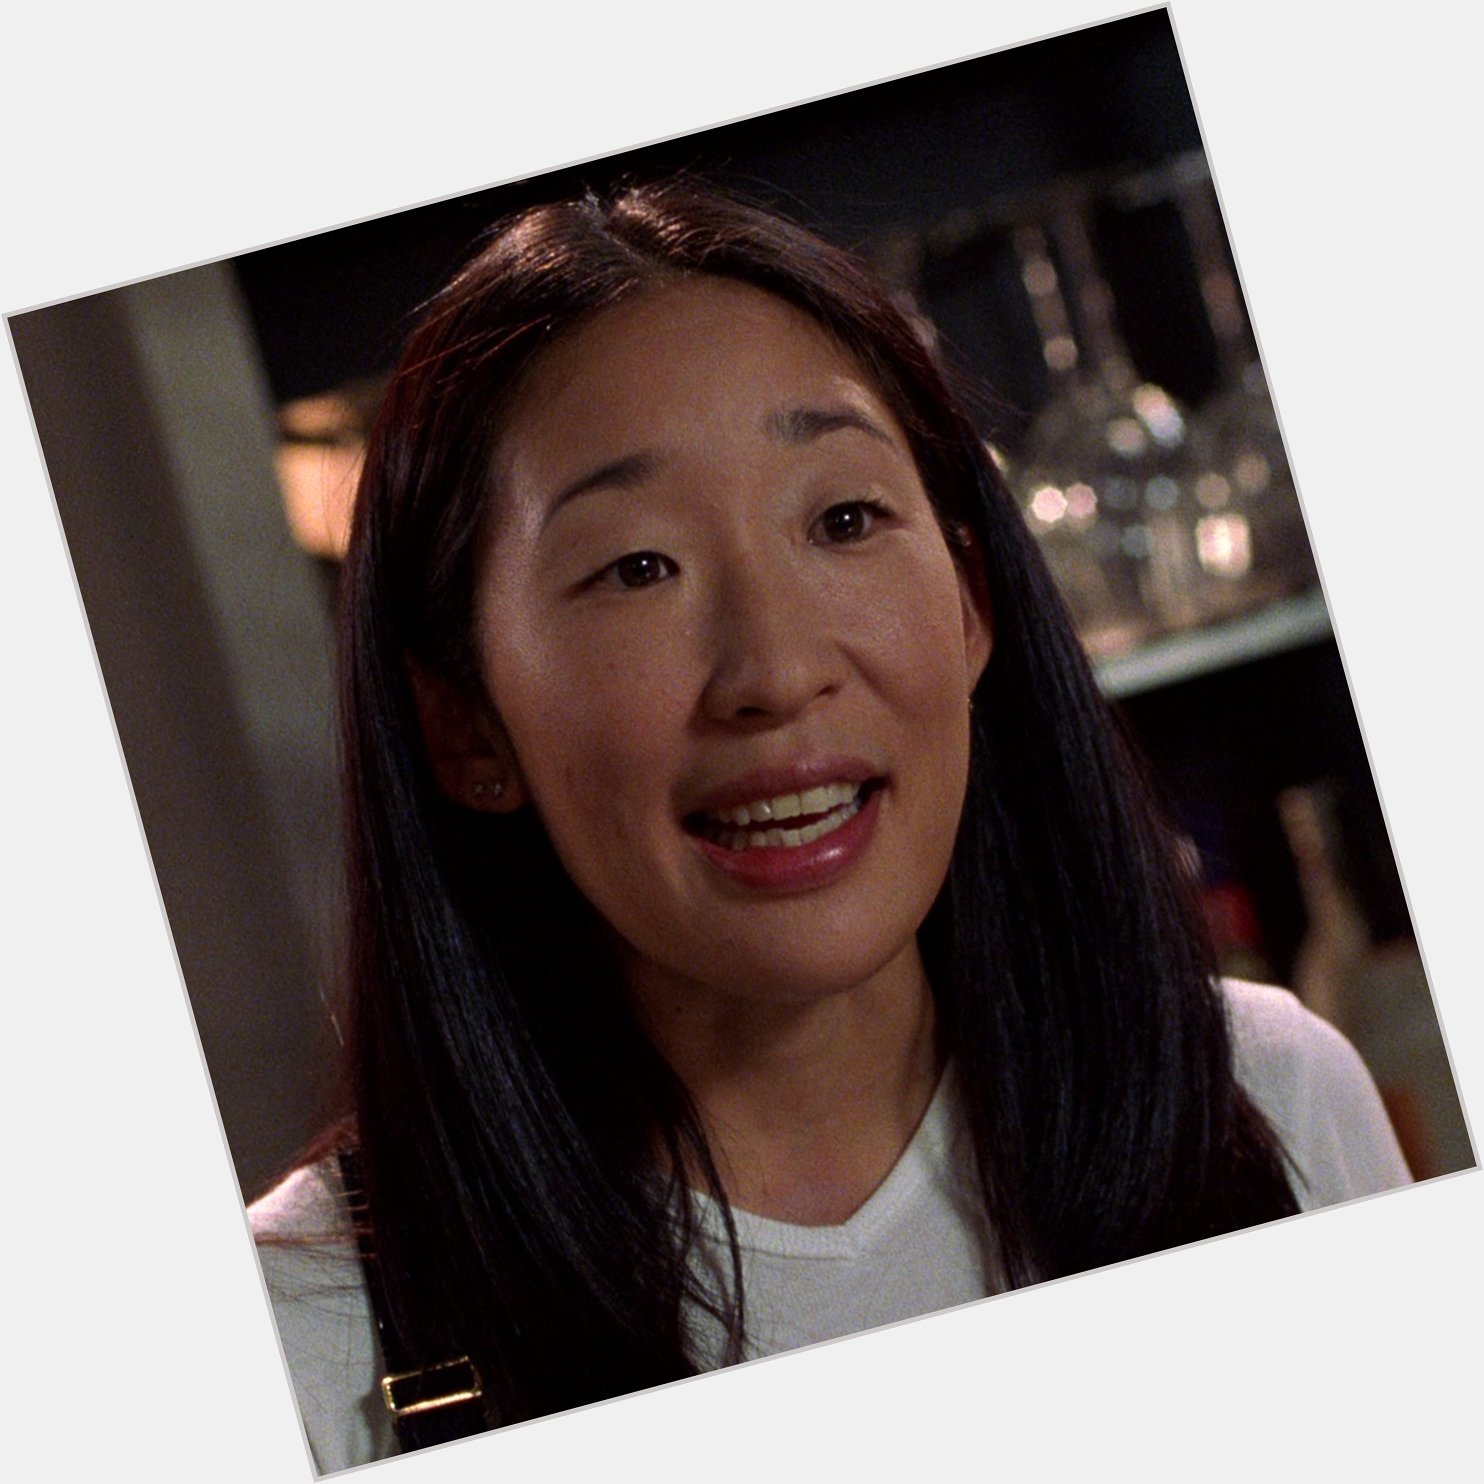 Happy Birthday Sandra Oh and thank you for wearing suspenders and kissing Kate Walsh in Under the Tuscan Sun 